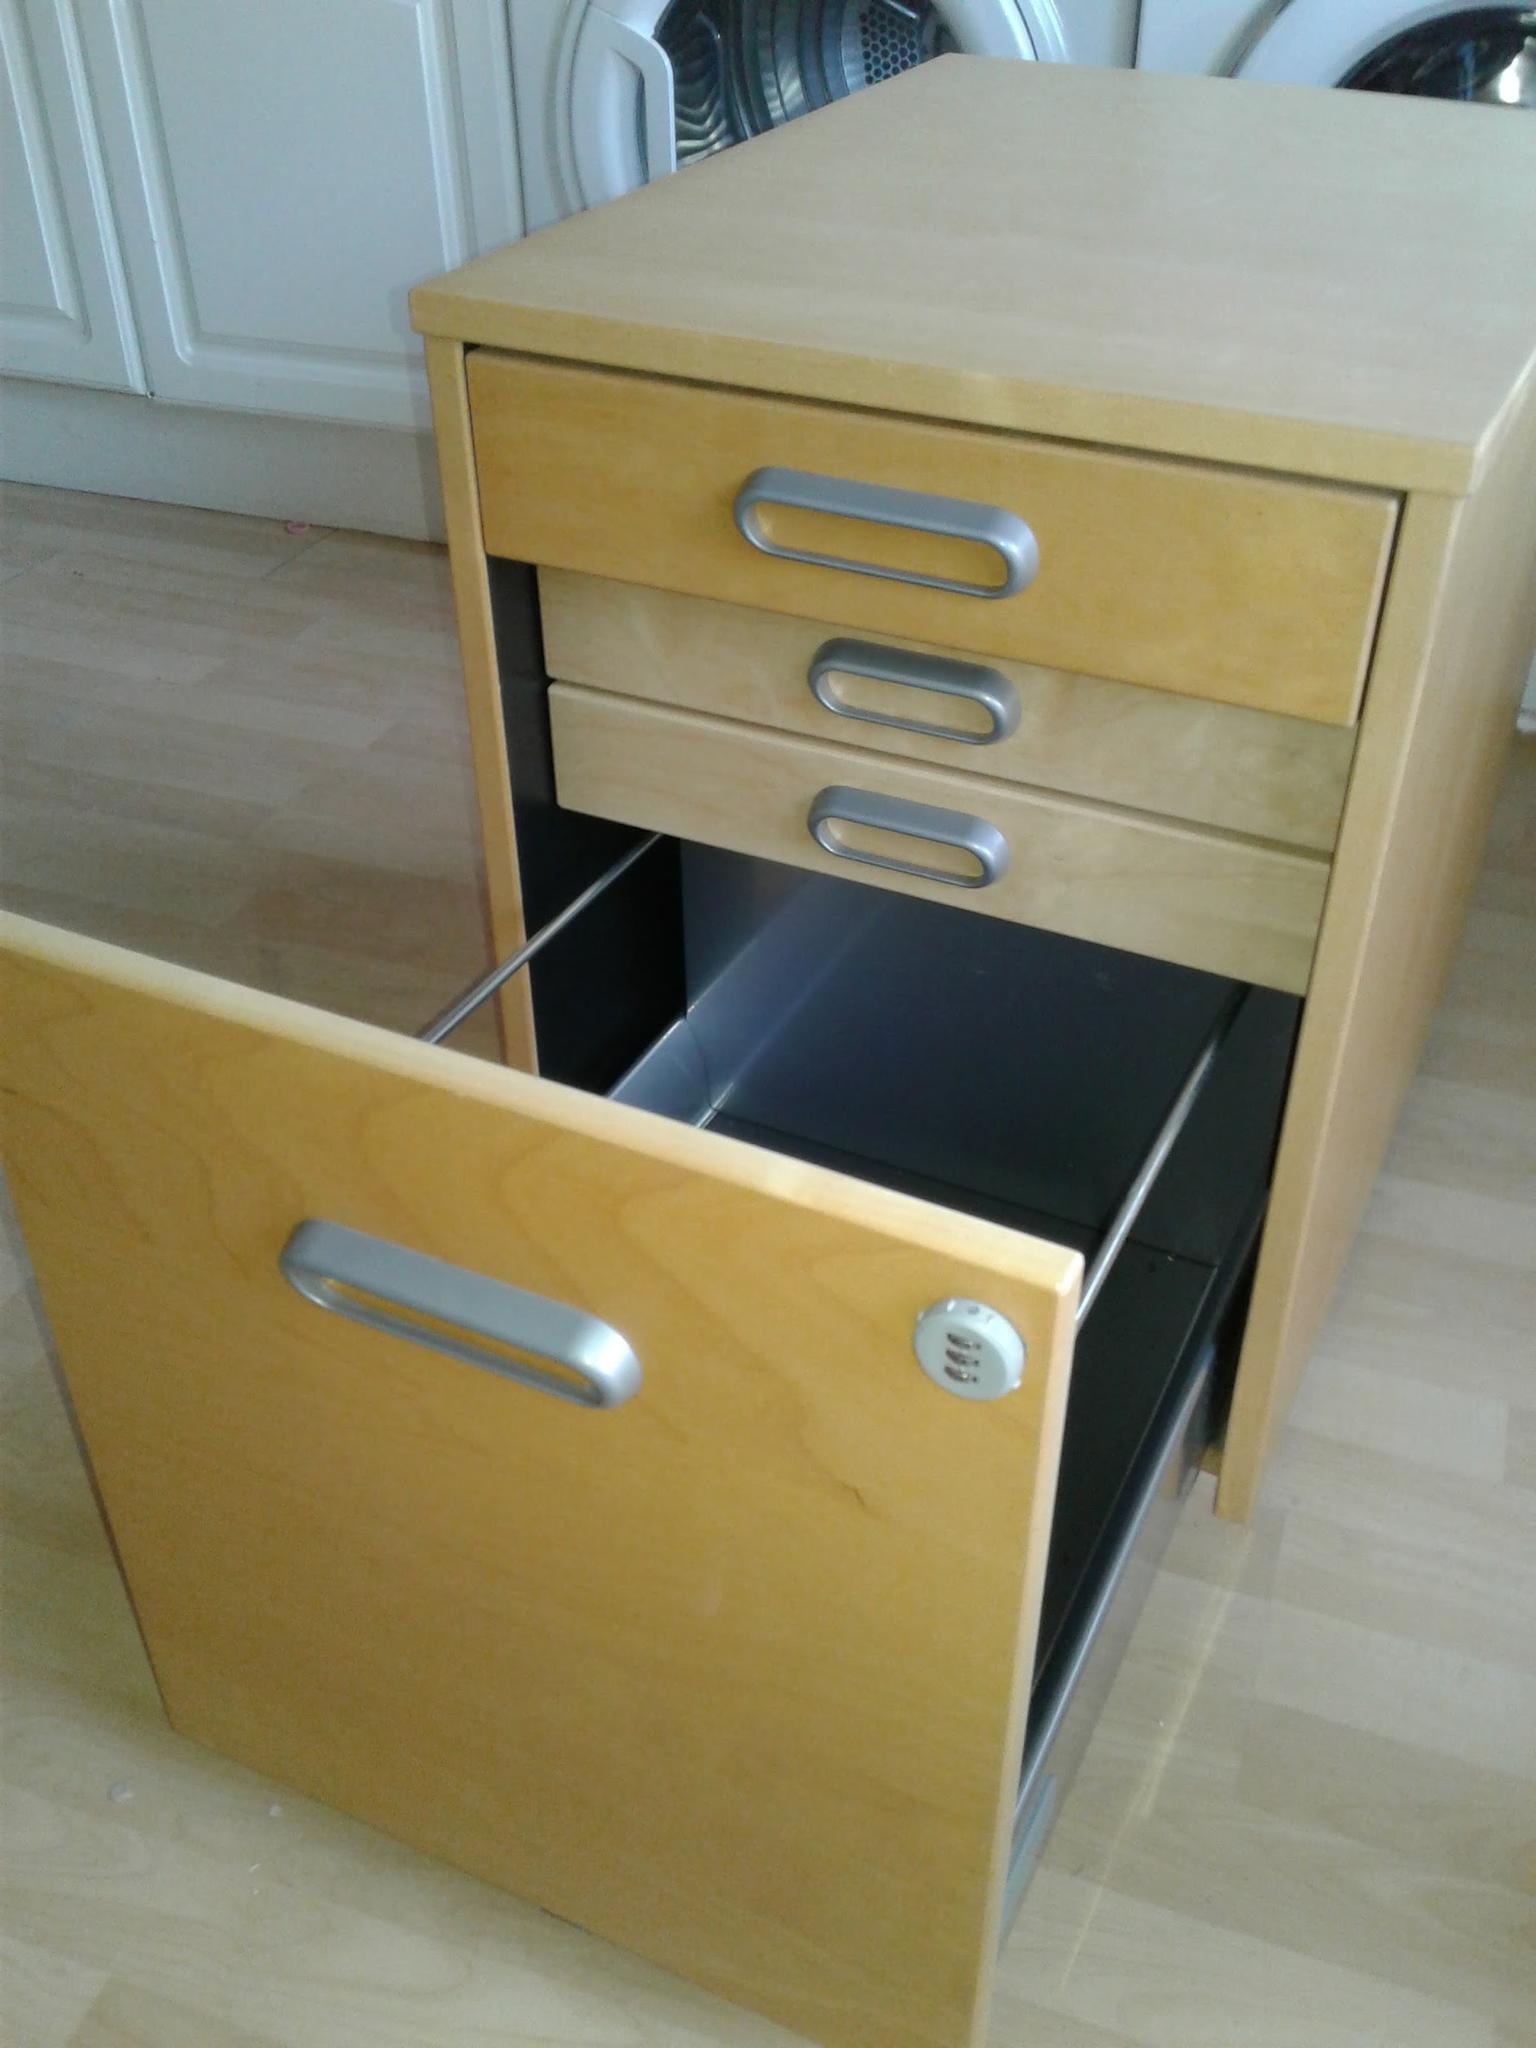 Ikea Galant Lockable Drawer Filing Unit In Coventry Fur 30 00